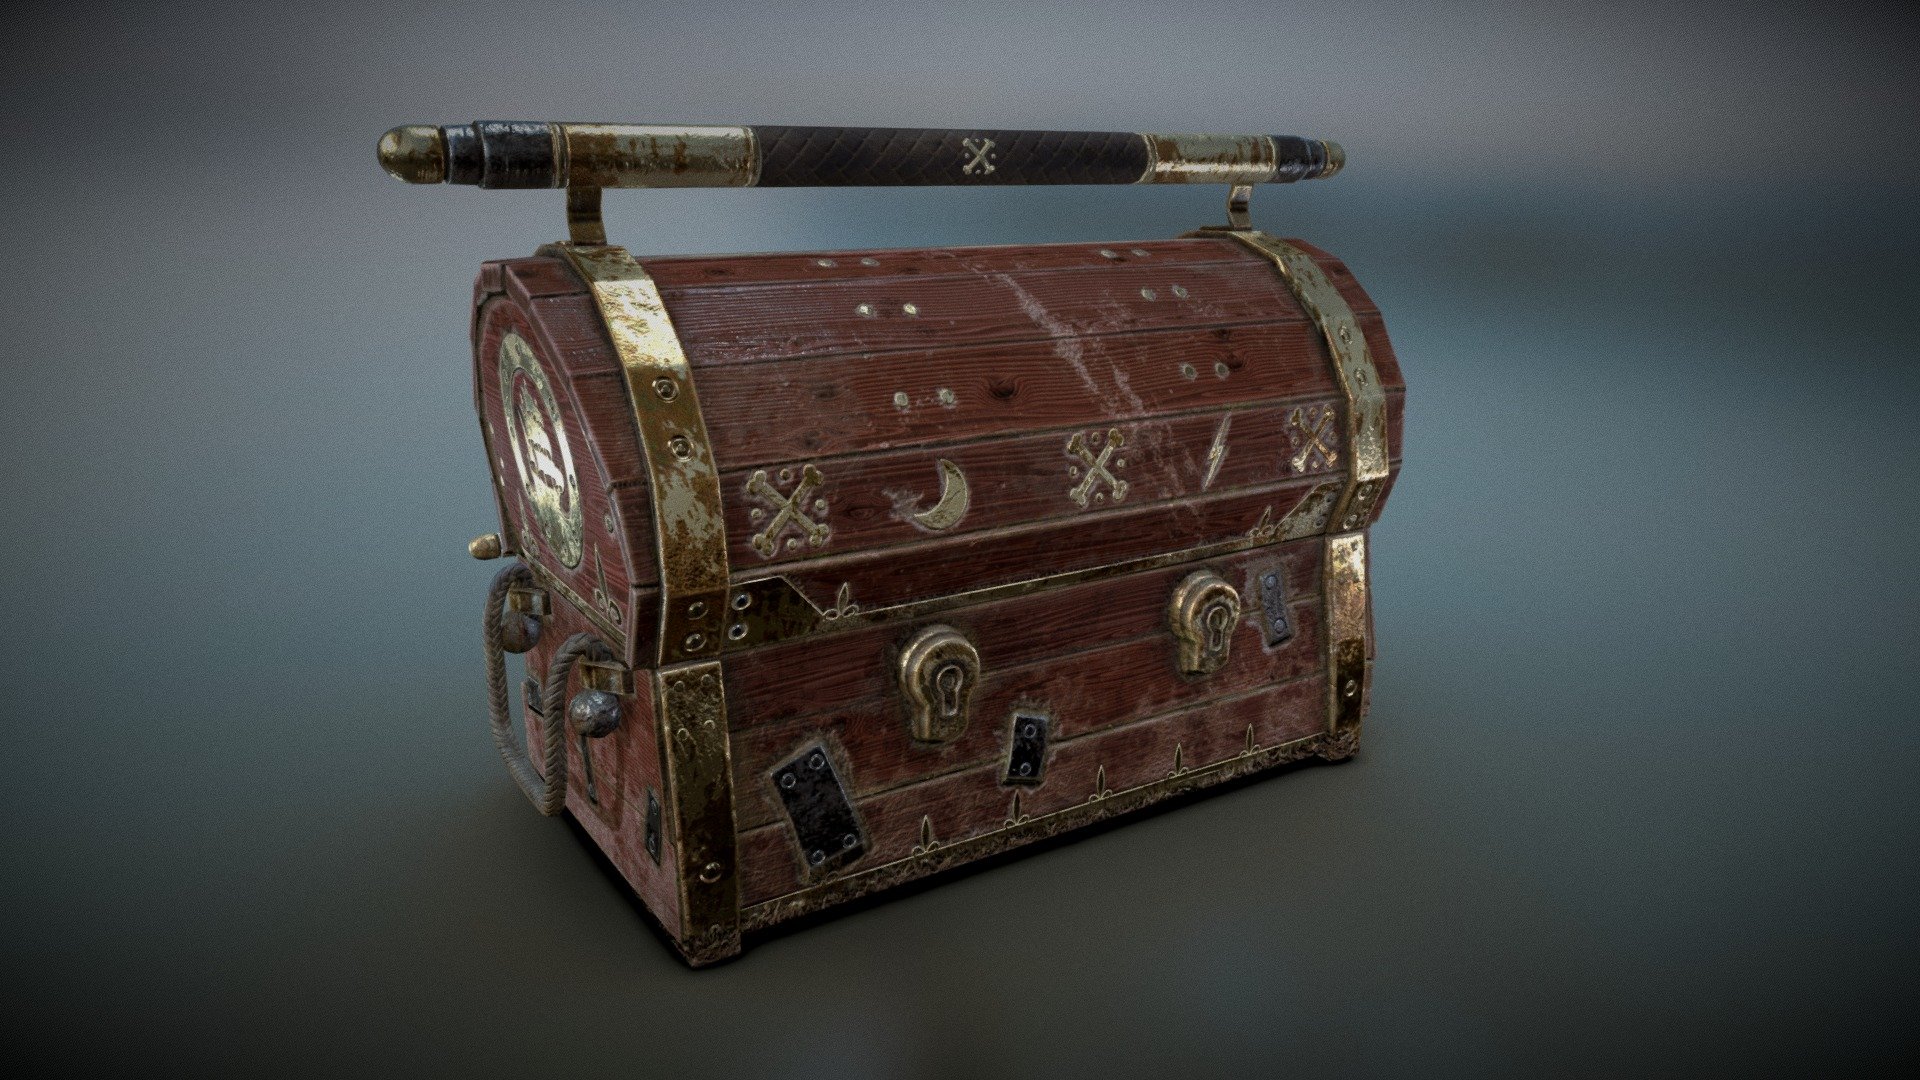 For a personal project - LA PIRATE DES CANARIS.
Game Asset: 4.5K tri
Highpoly modeling and low poly modeling made in Maya
*Texture and render made in Substance Painter
Responsible for all aspects
www.doua.art - LA PIRATE DES CANARIS -The Treasure Chest - 3D model by Doua Philippe Gue (@GUYPHILL) 3d model